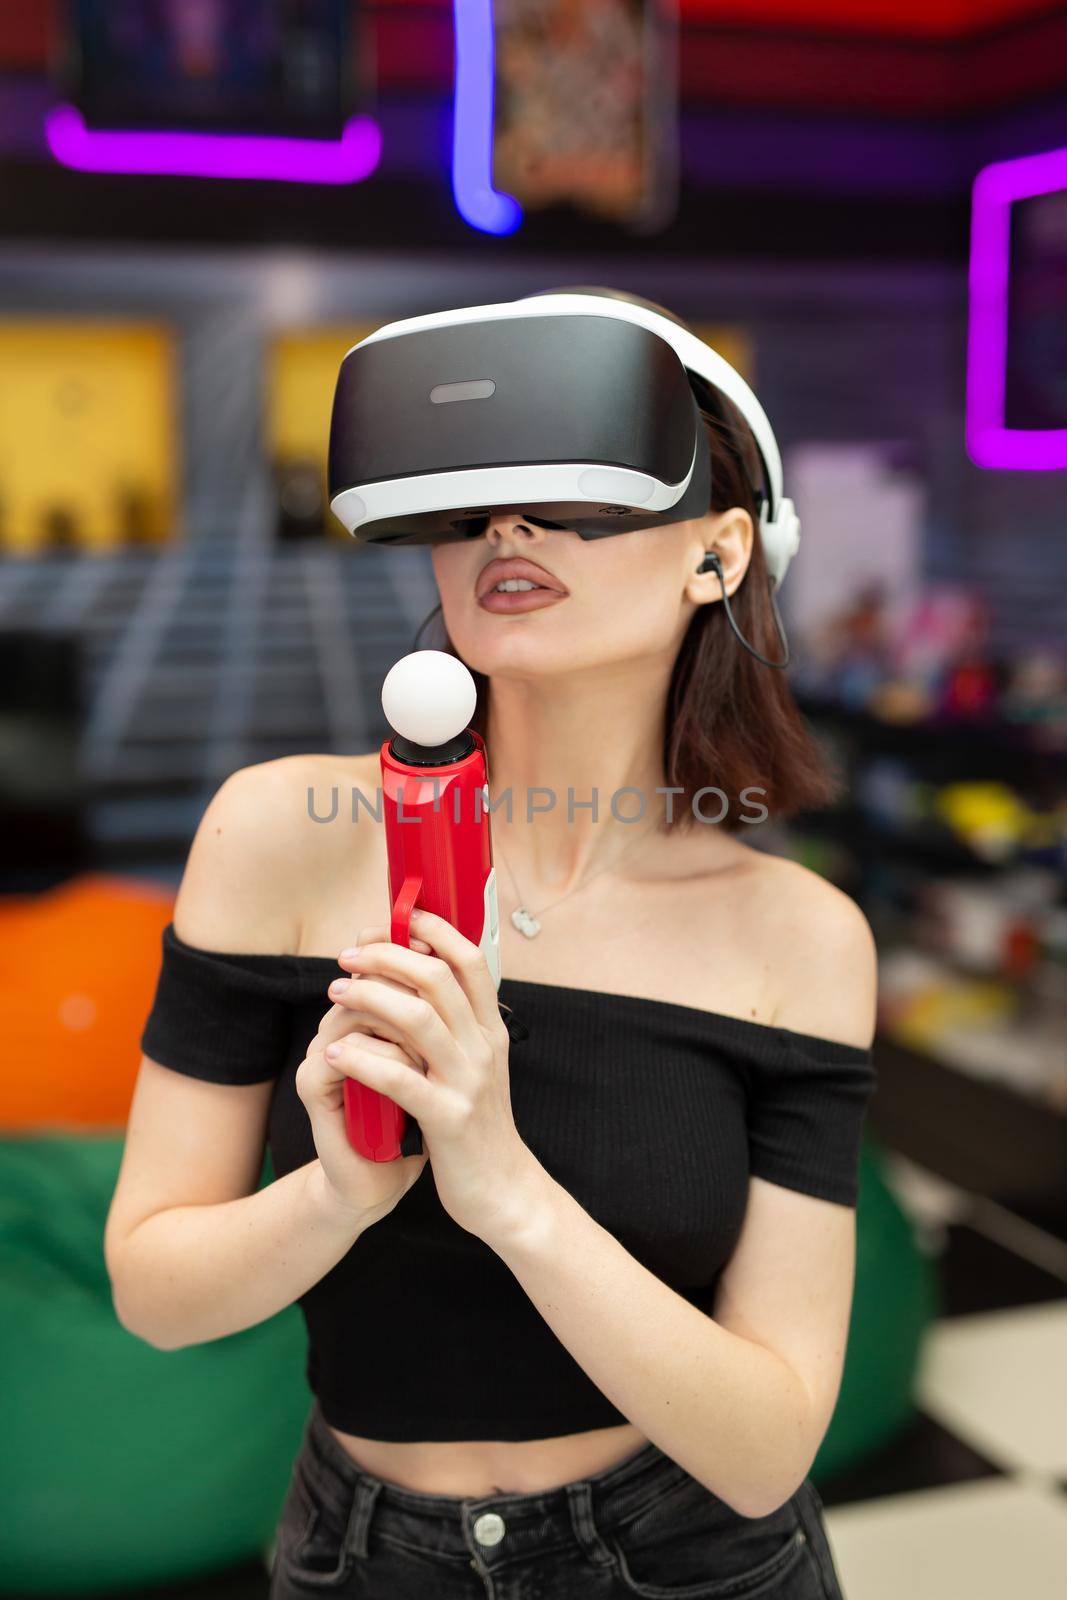 Young woman plays on a video games console, an emotional gamer shoots a game using a gun controller in a game club. VR